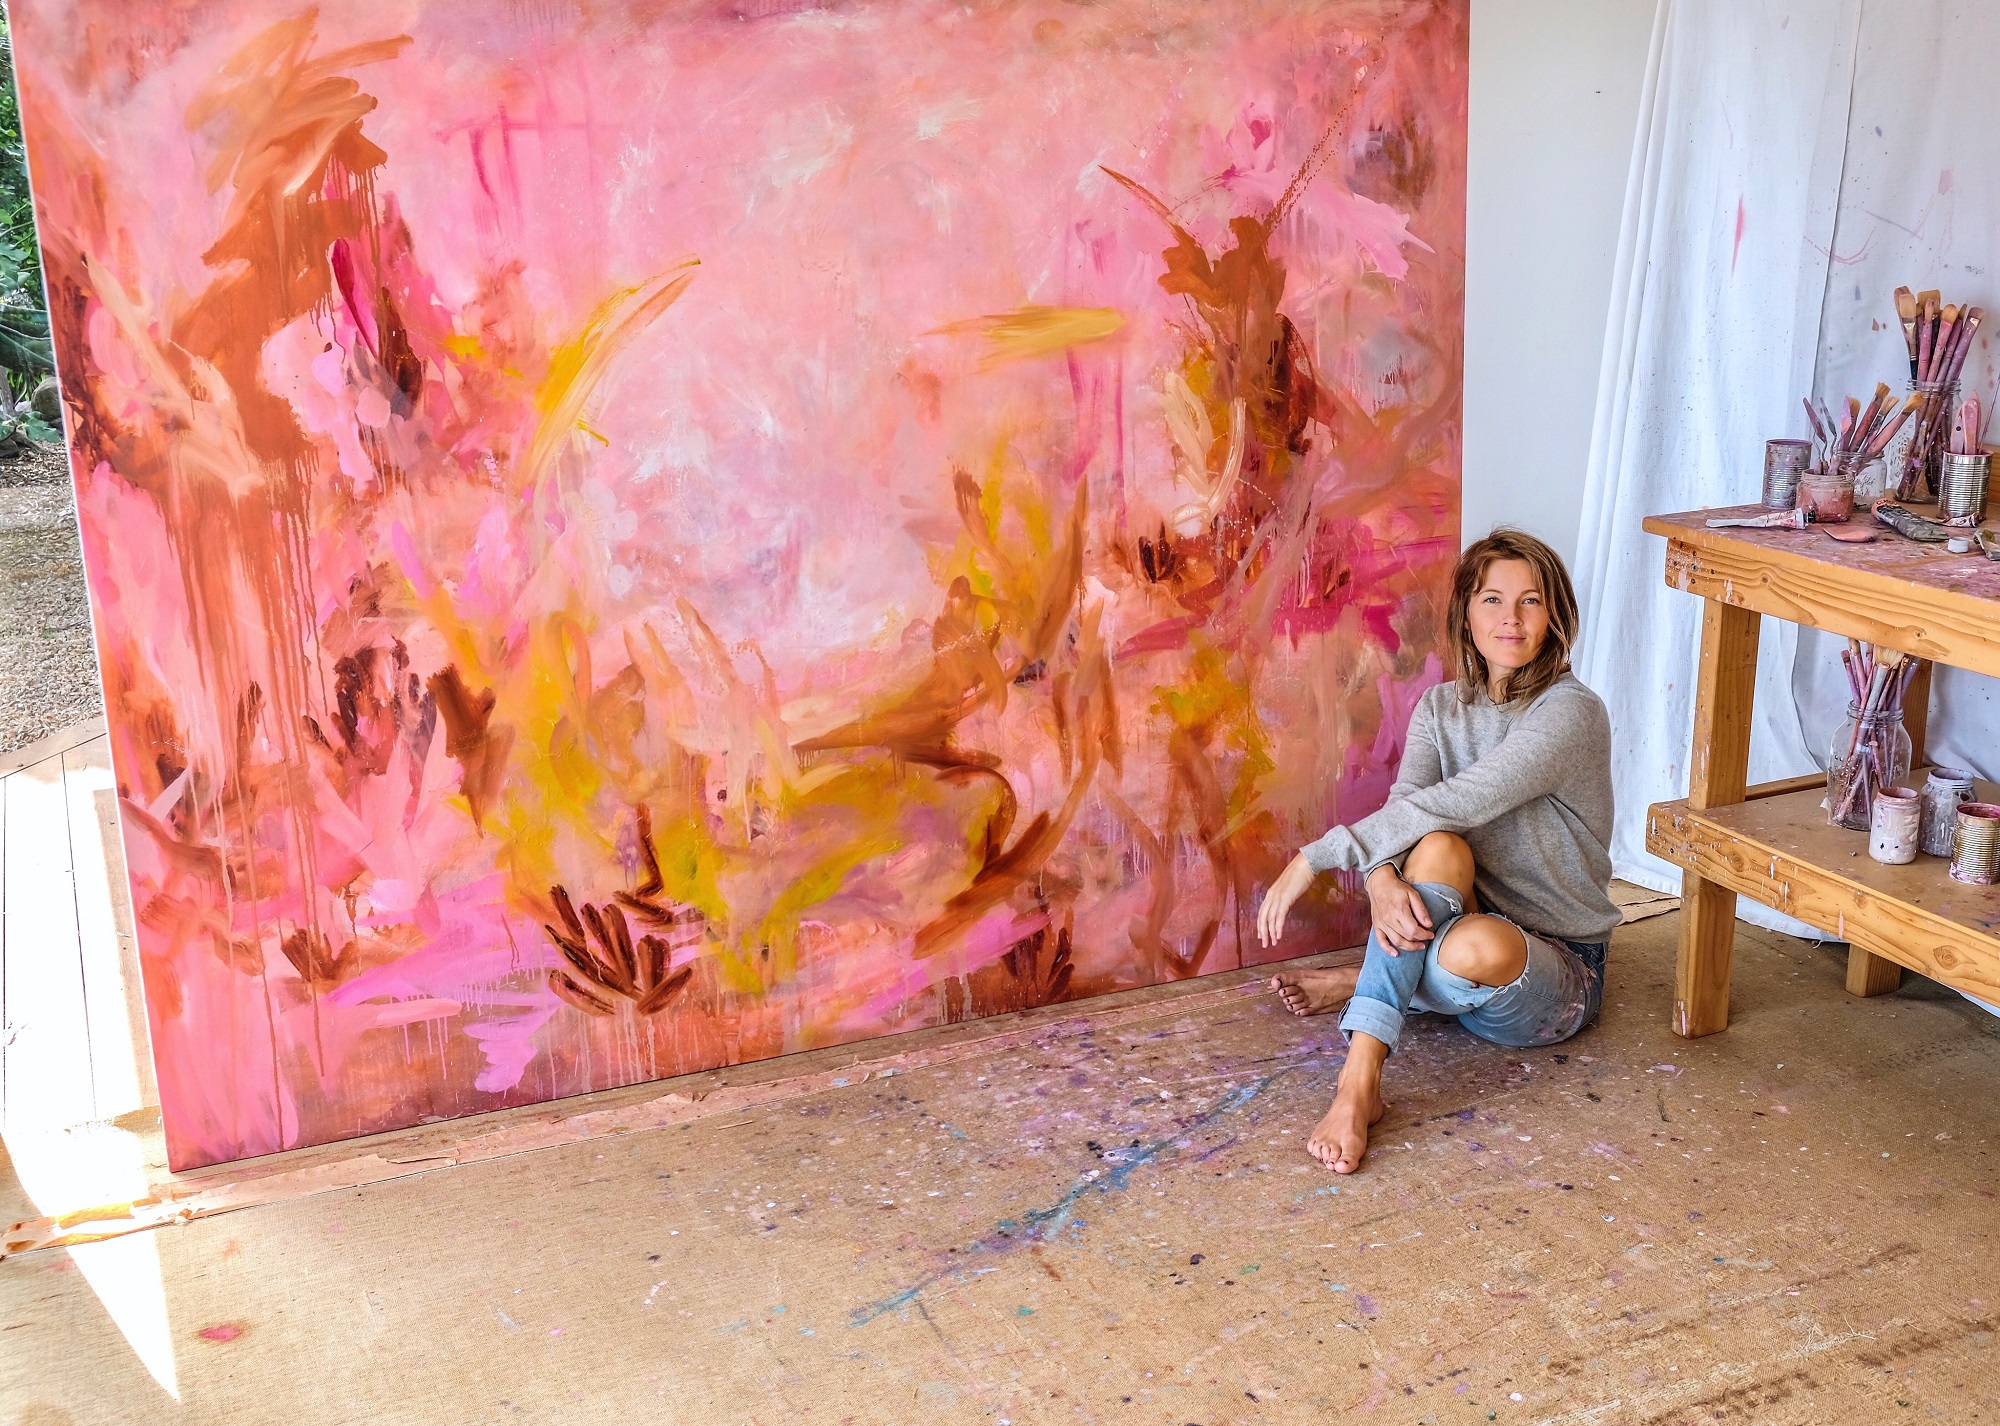 Carolina Grunér with finished painting 'All you need to do is begin', oil on canvas, 180 x 240 cm, 2019